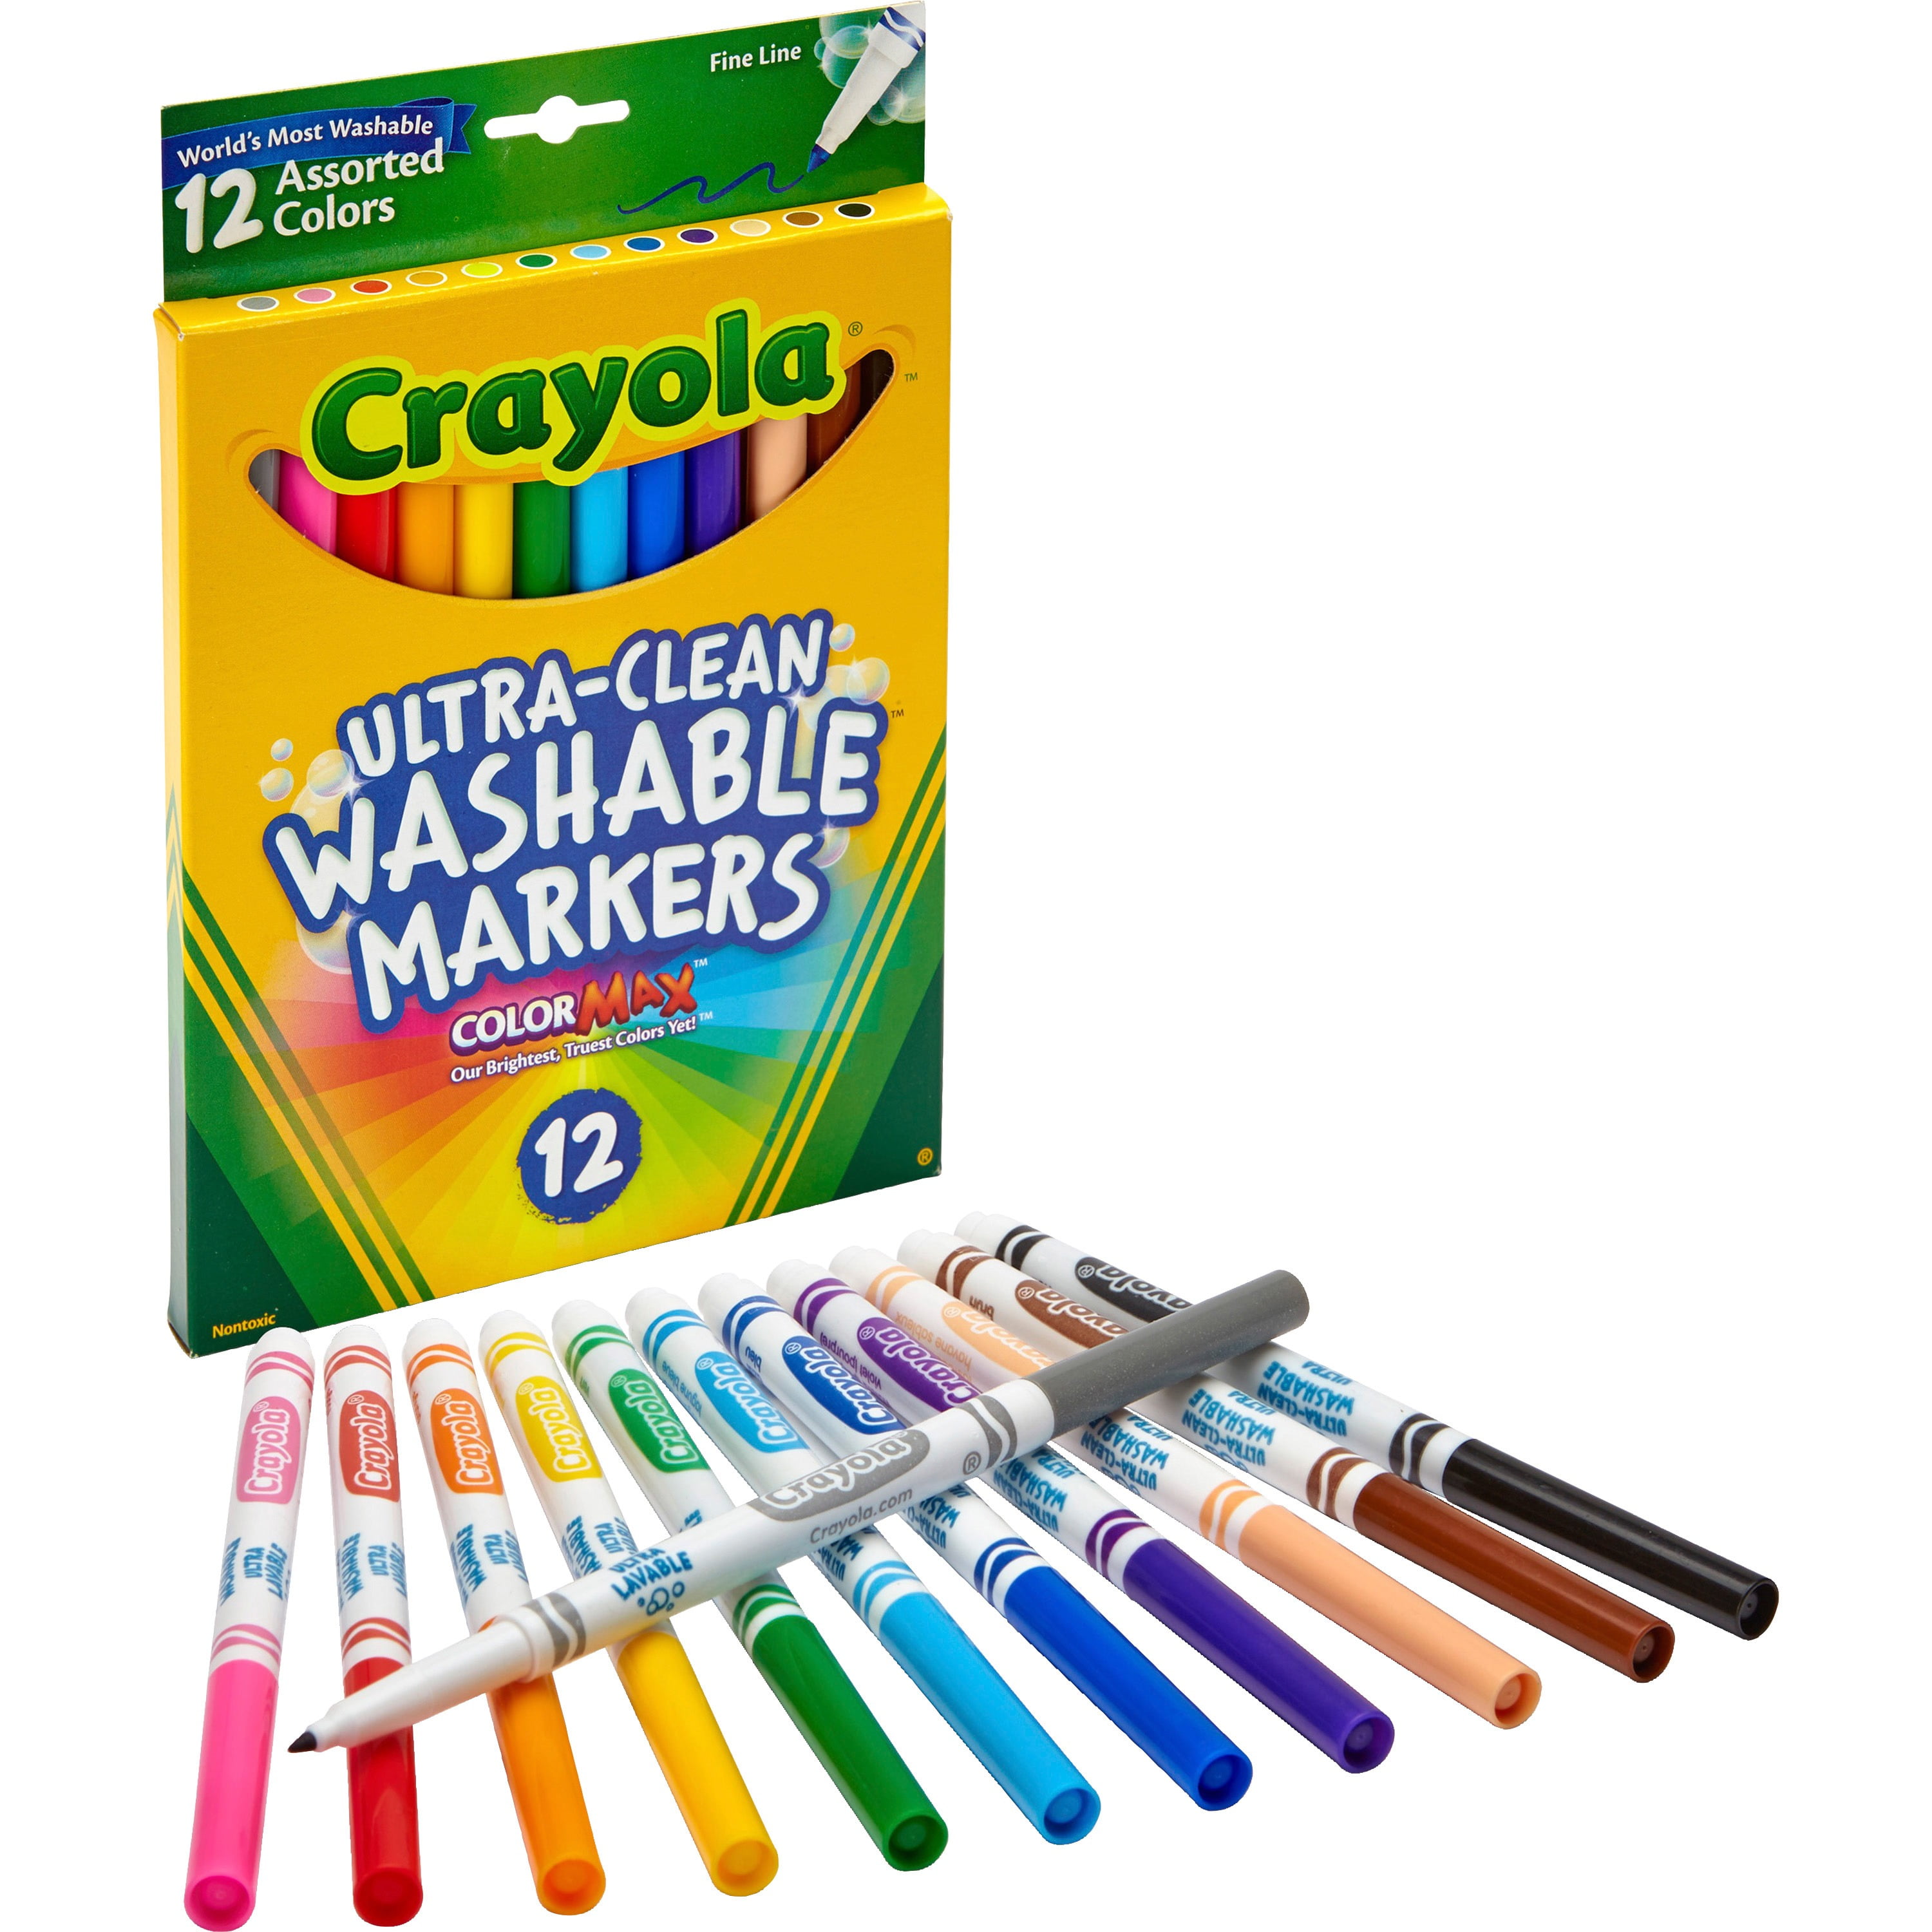 Crayola Colored Pencils, Classic Crayons, and Broad and Fine Tip